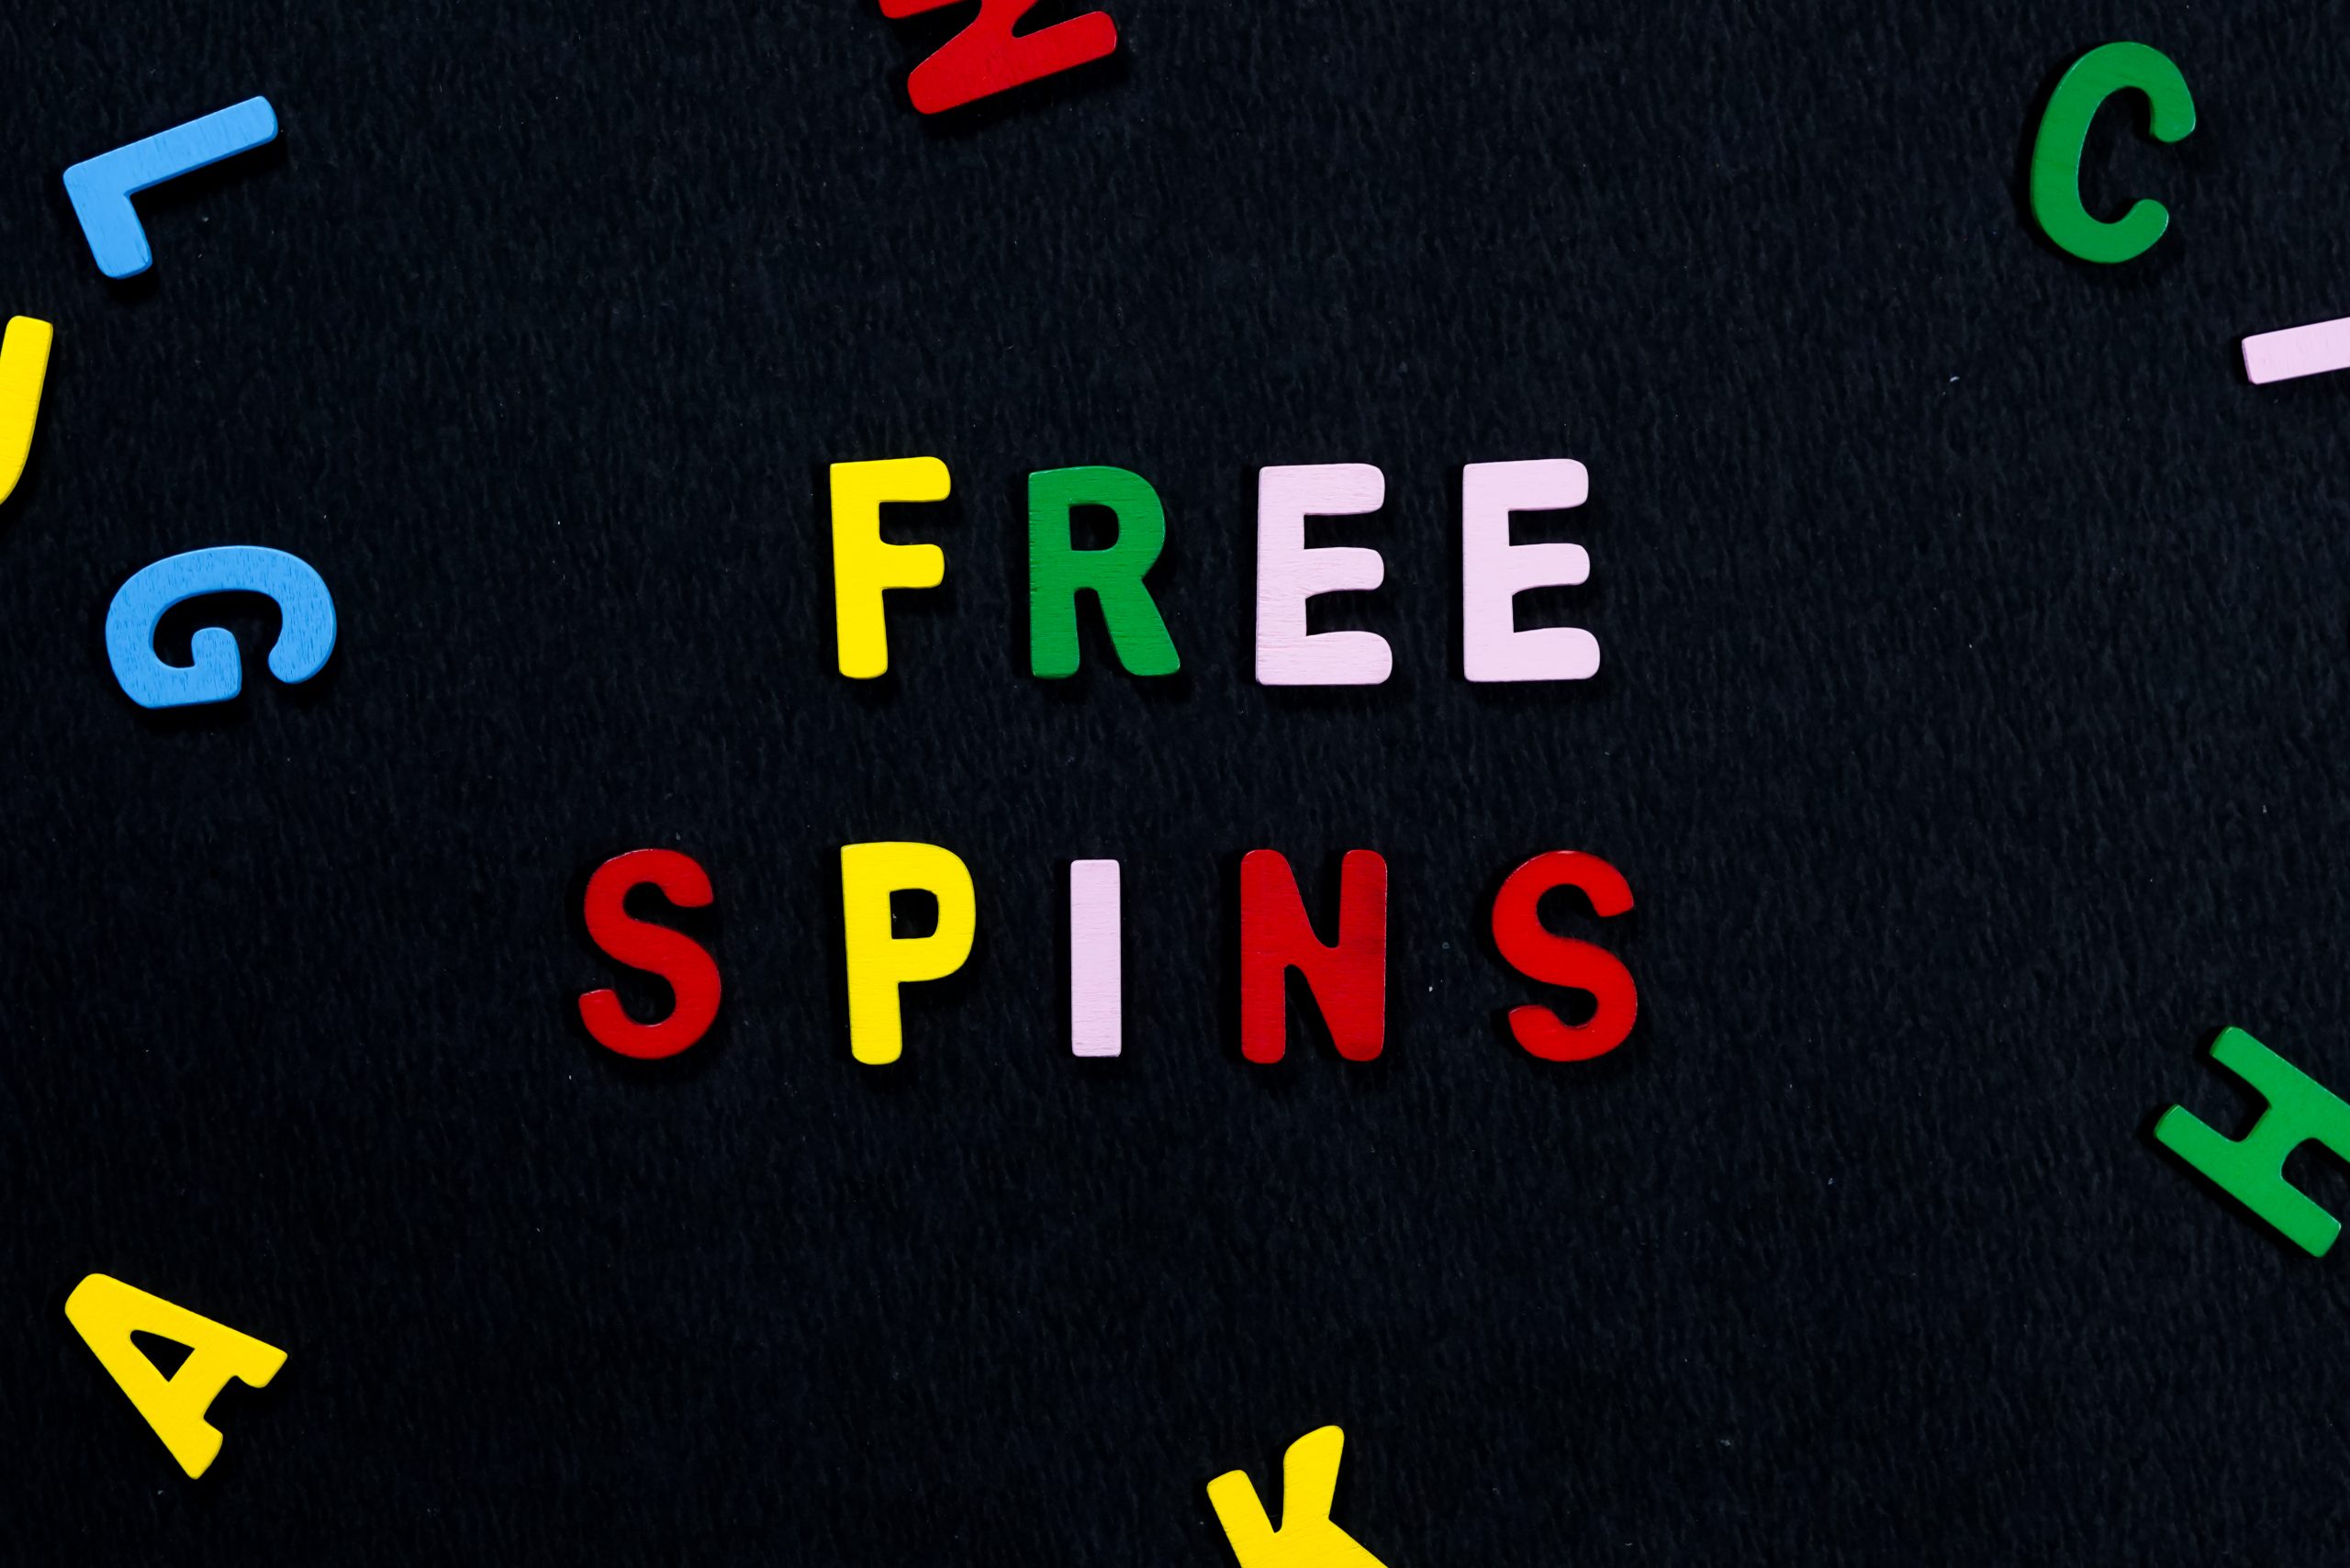 Free spins to play slot machines